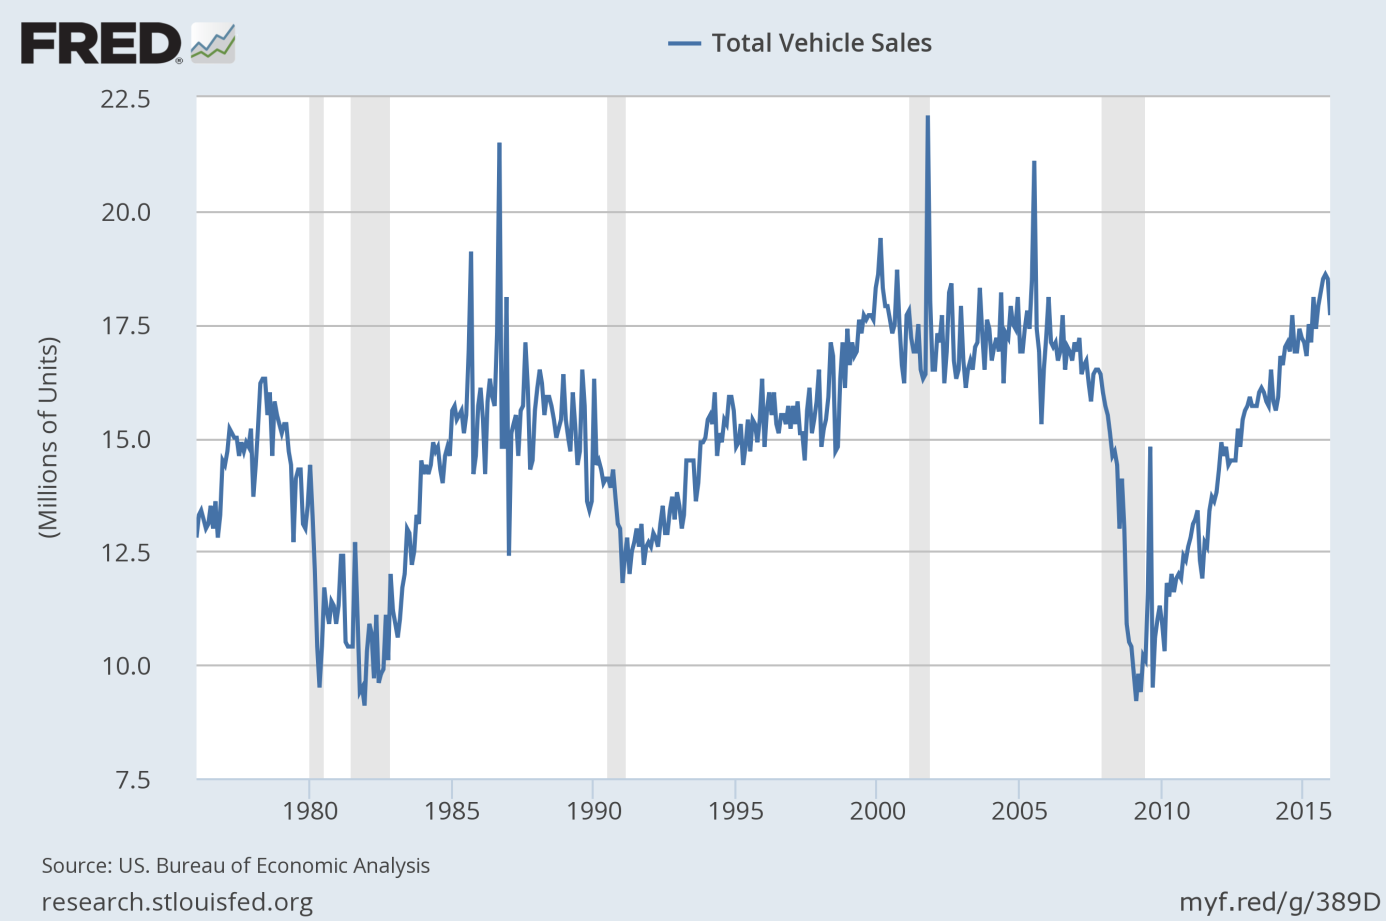 Total vehicle sales from 1976 to 2015 (in millions of units).